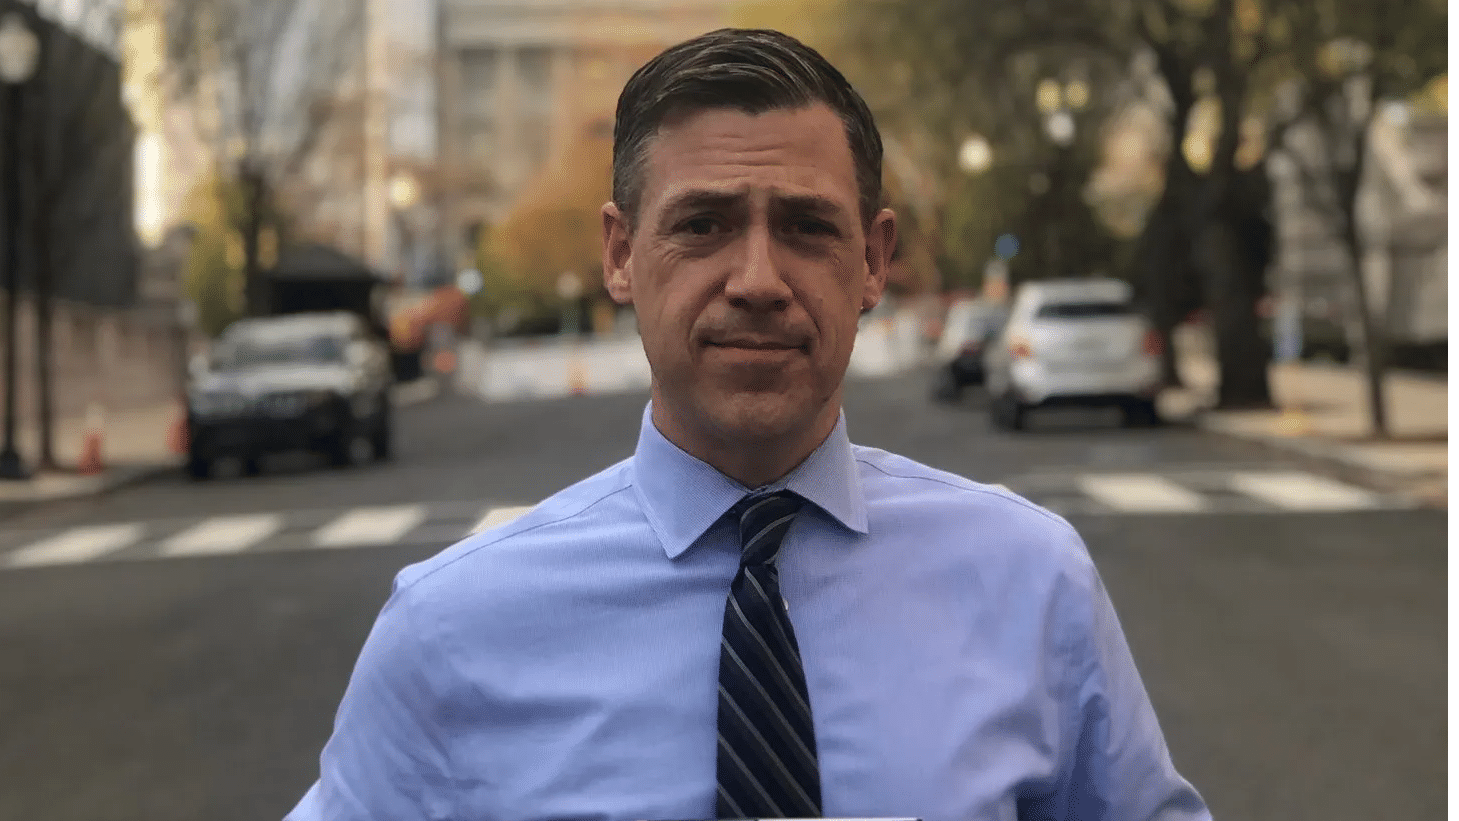 Twitter suspends Rep. Jim Banks’ account, cites ‘targeted misgendering’